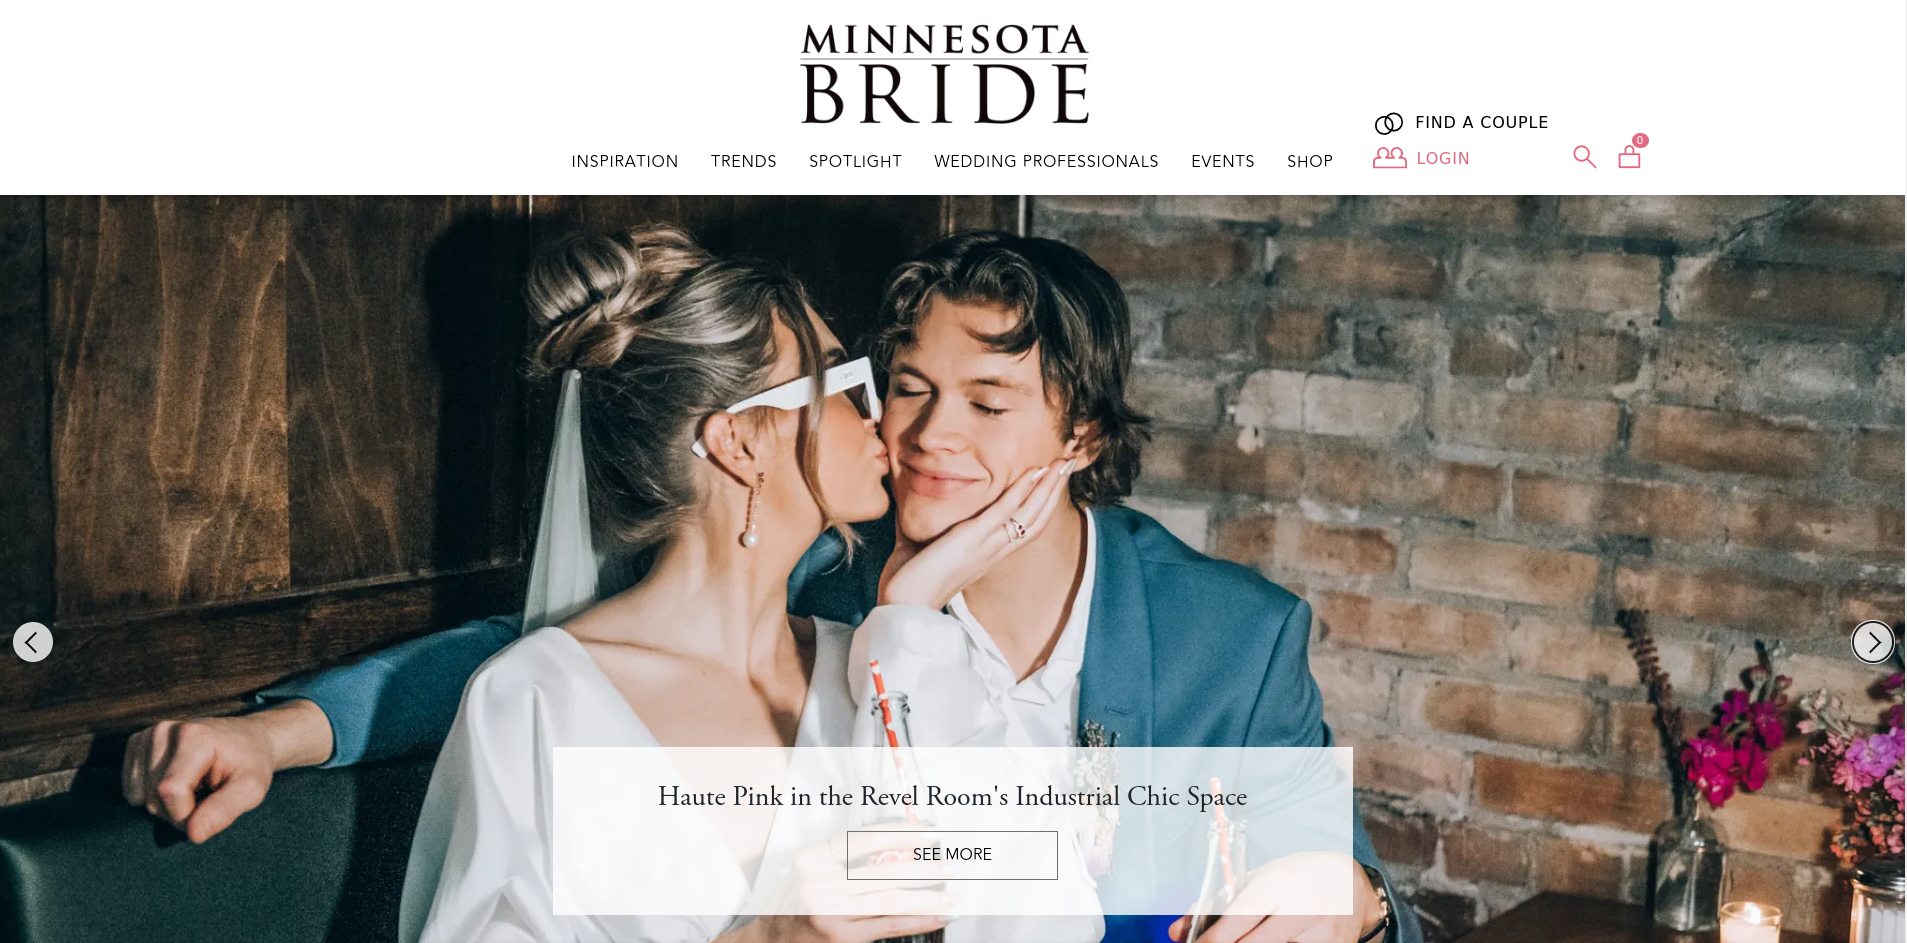 A screenshot of Minnesota Bride website showing a bride kissing a group on the cheek.